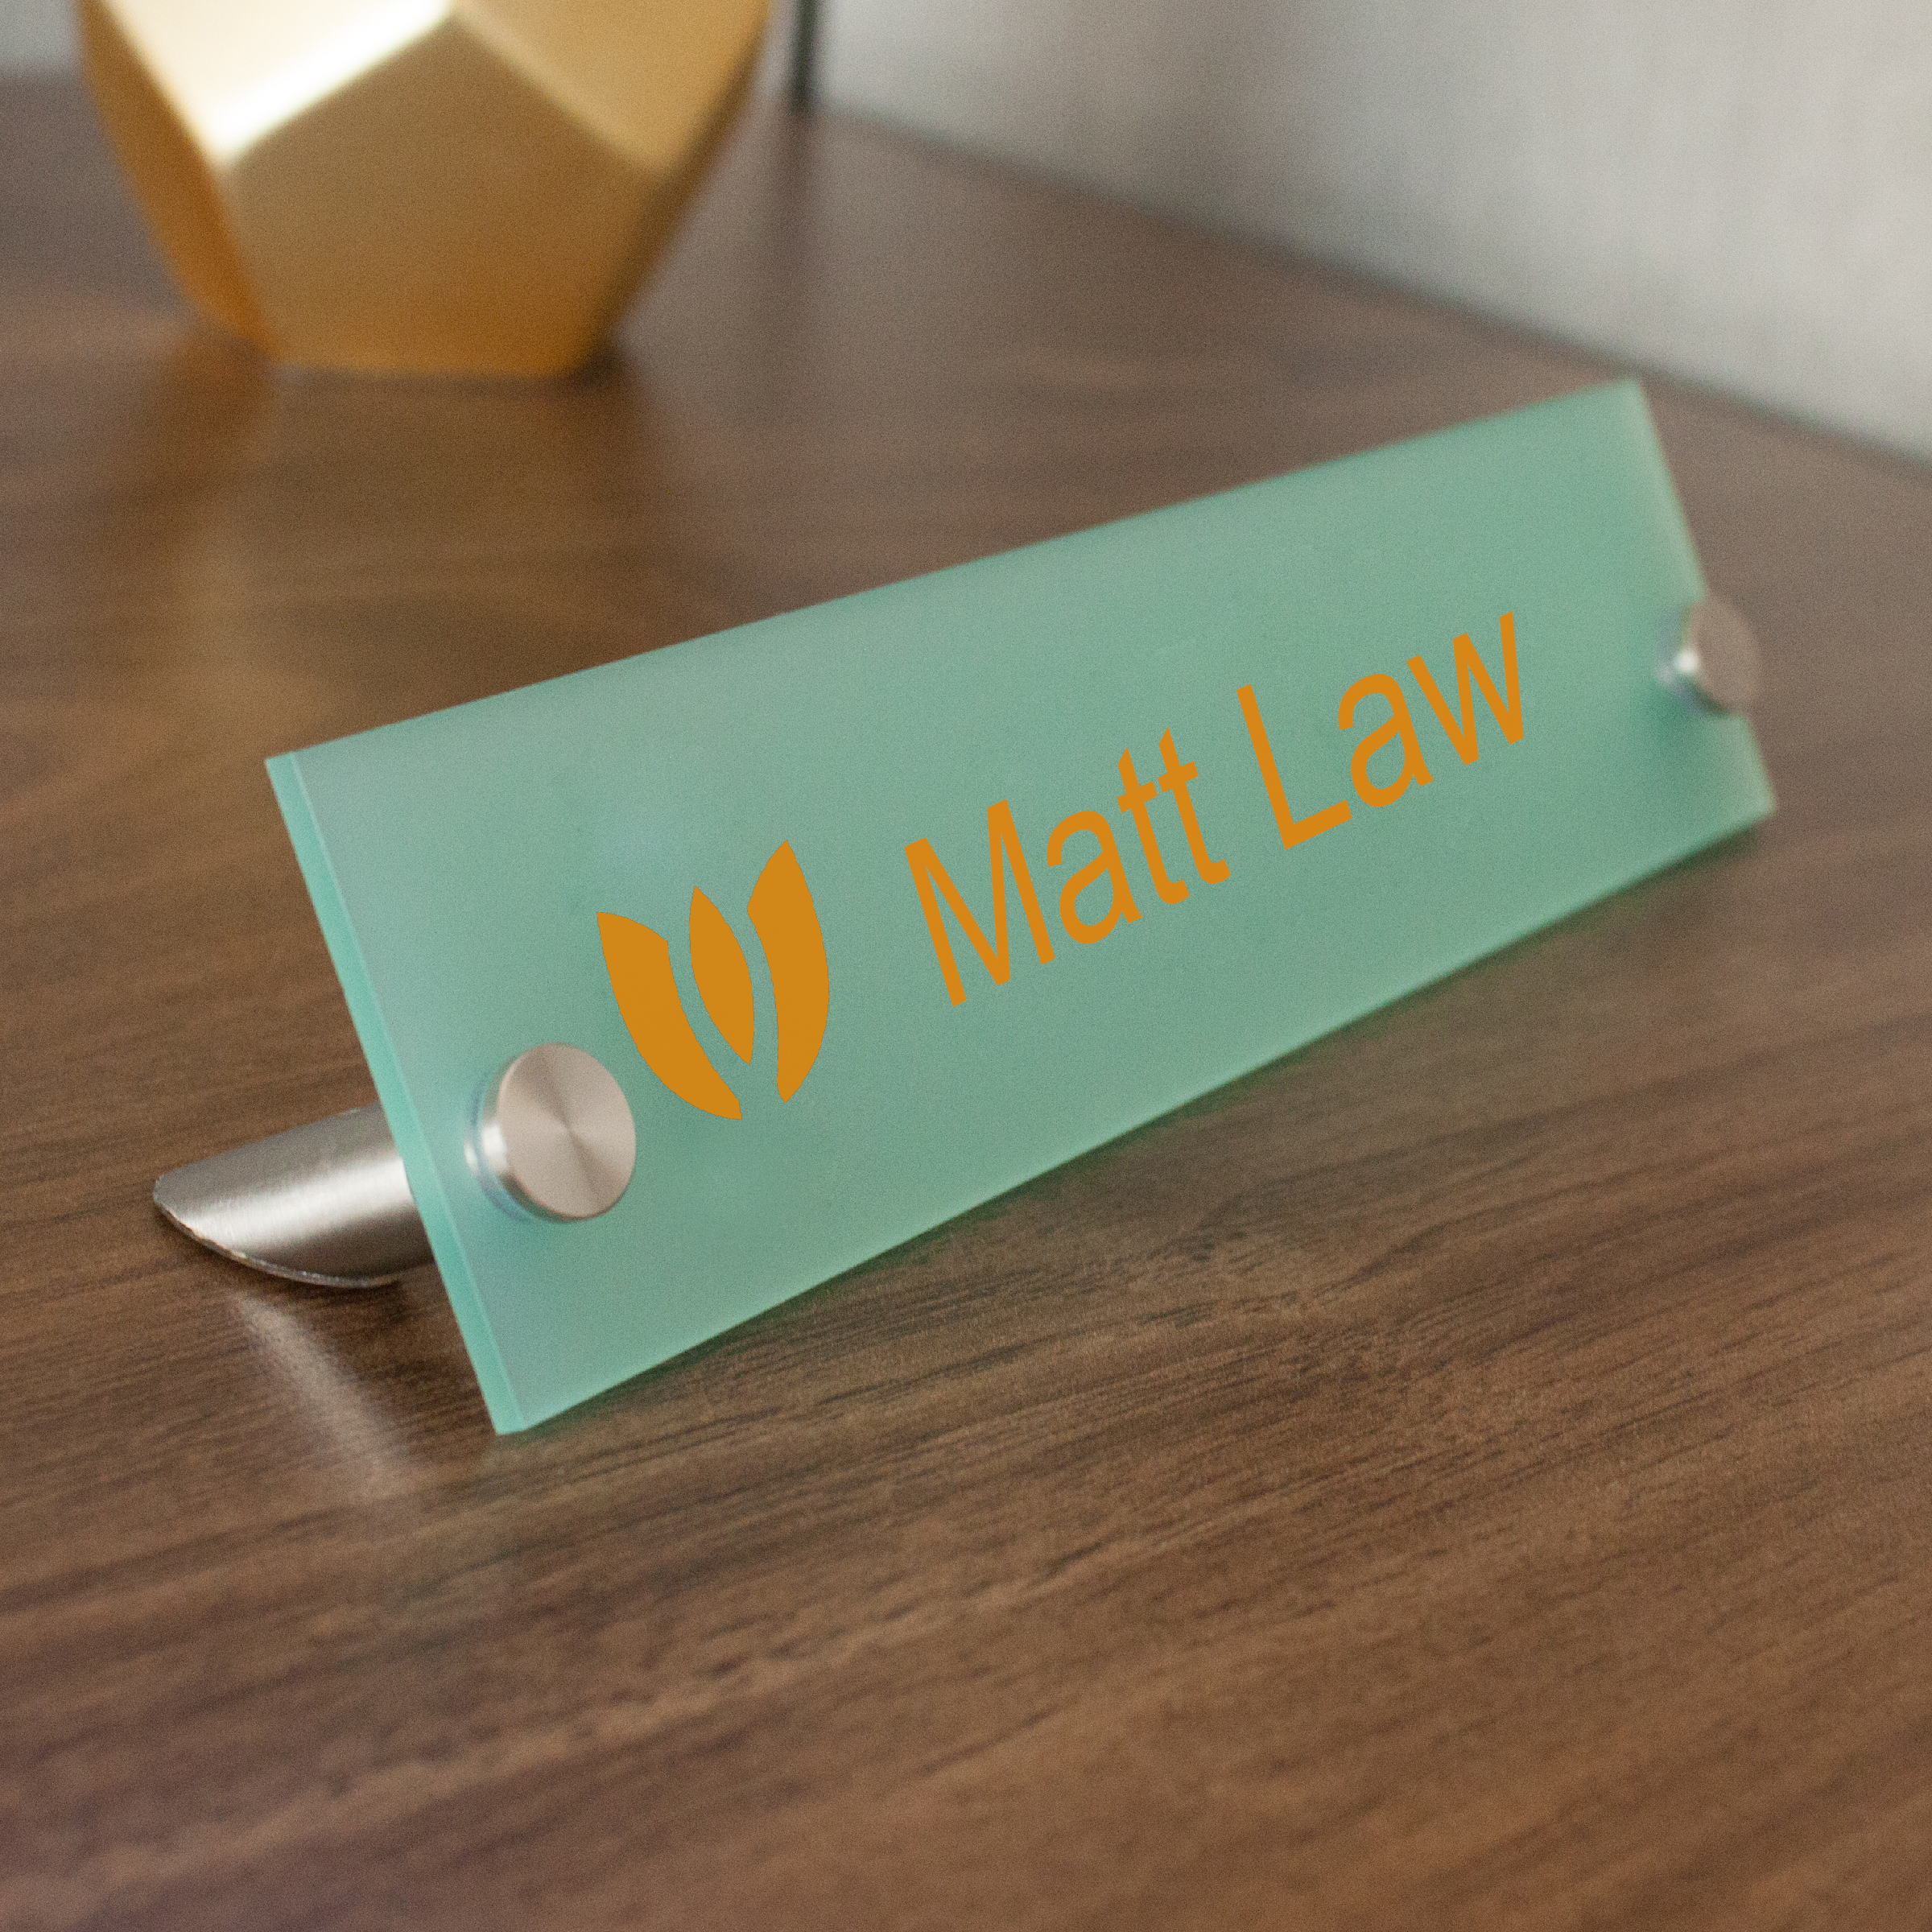 Frosted Acrylic Desk Name Plates For Offices Rectangle